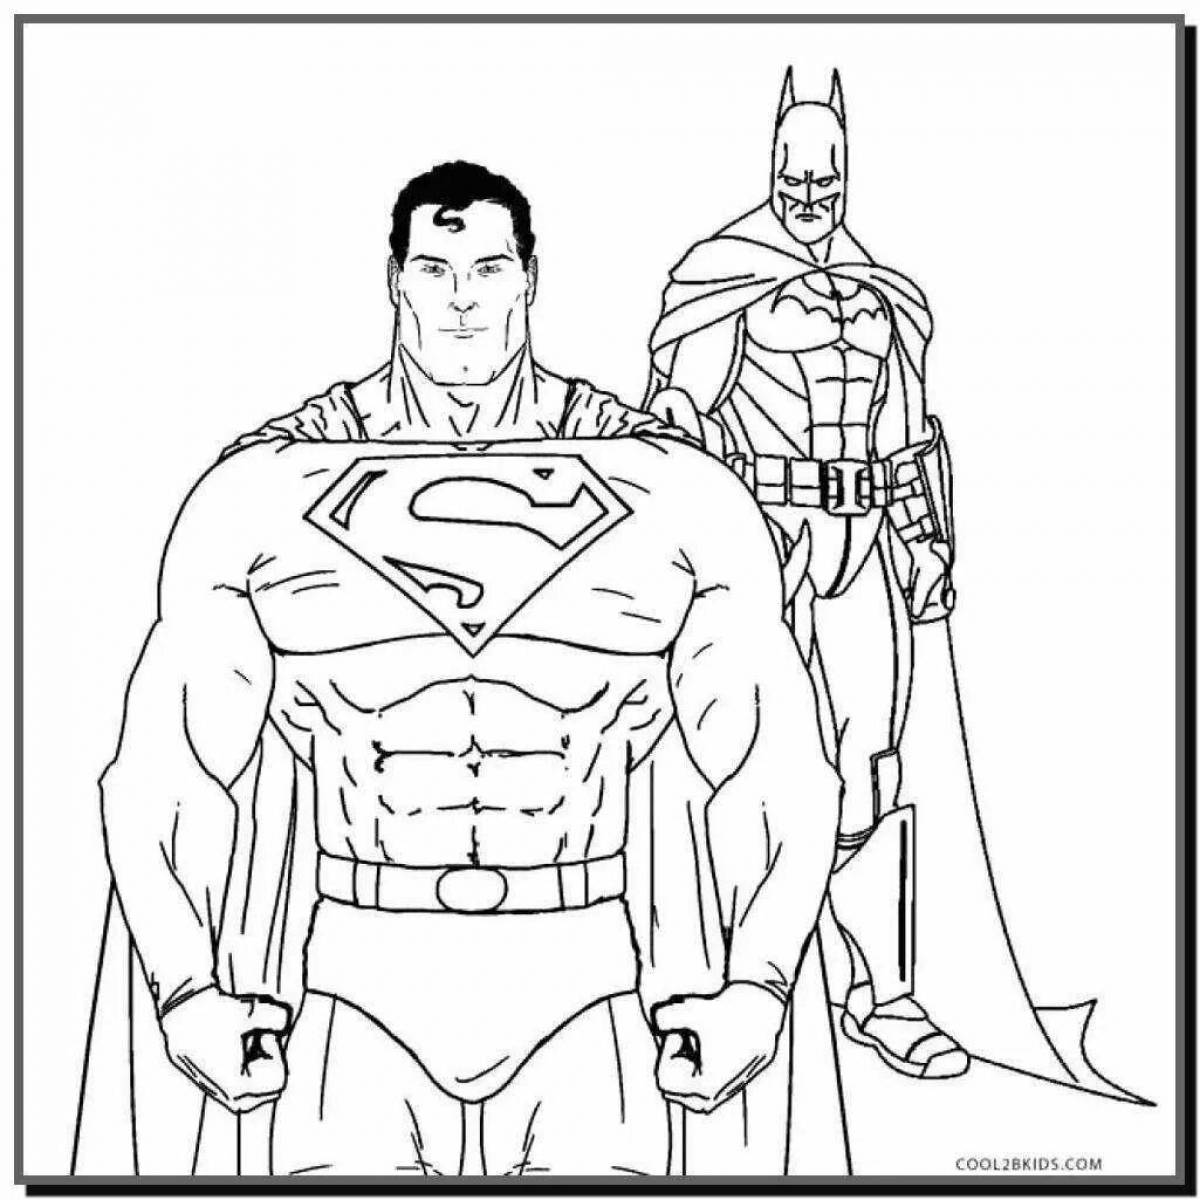 Coloring pages of superman and spiderman